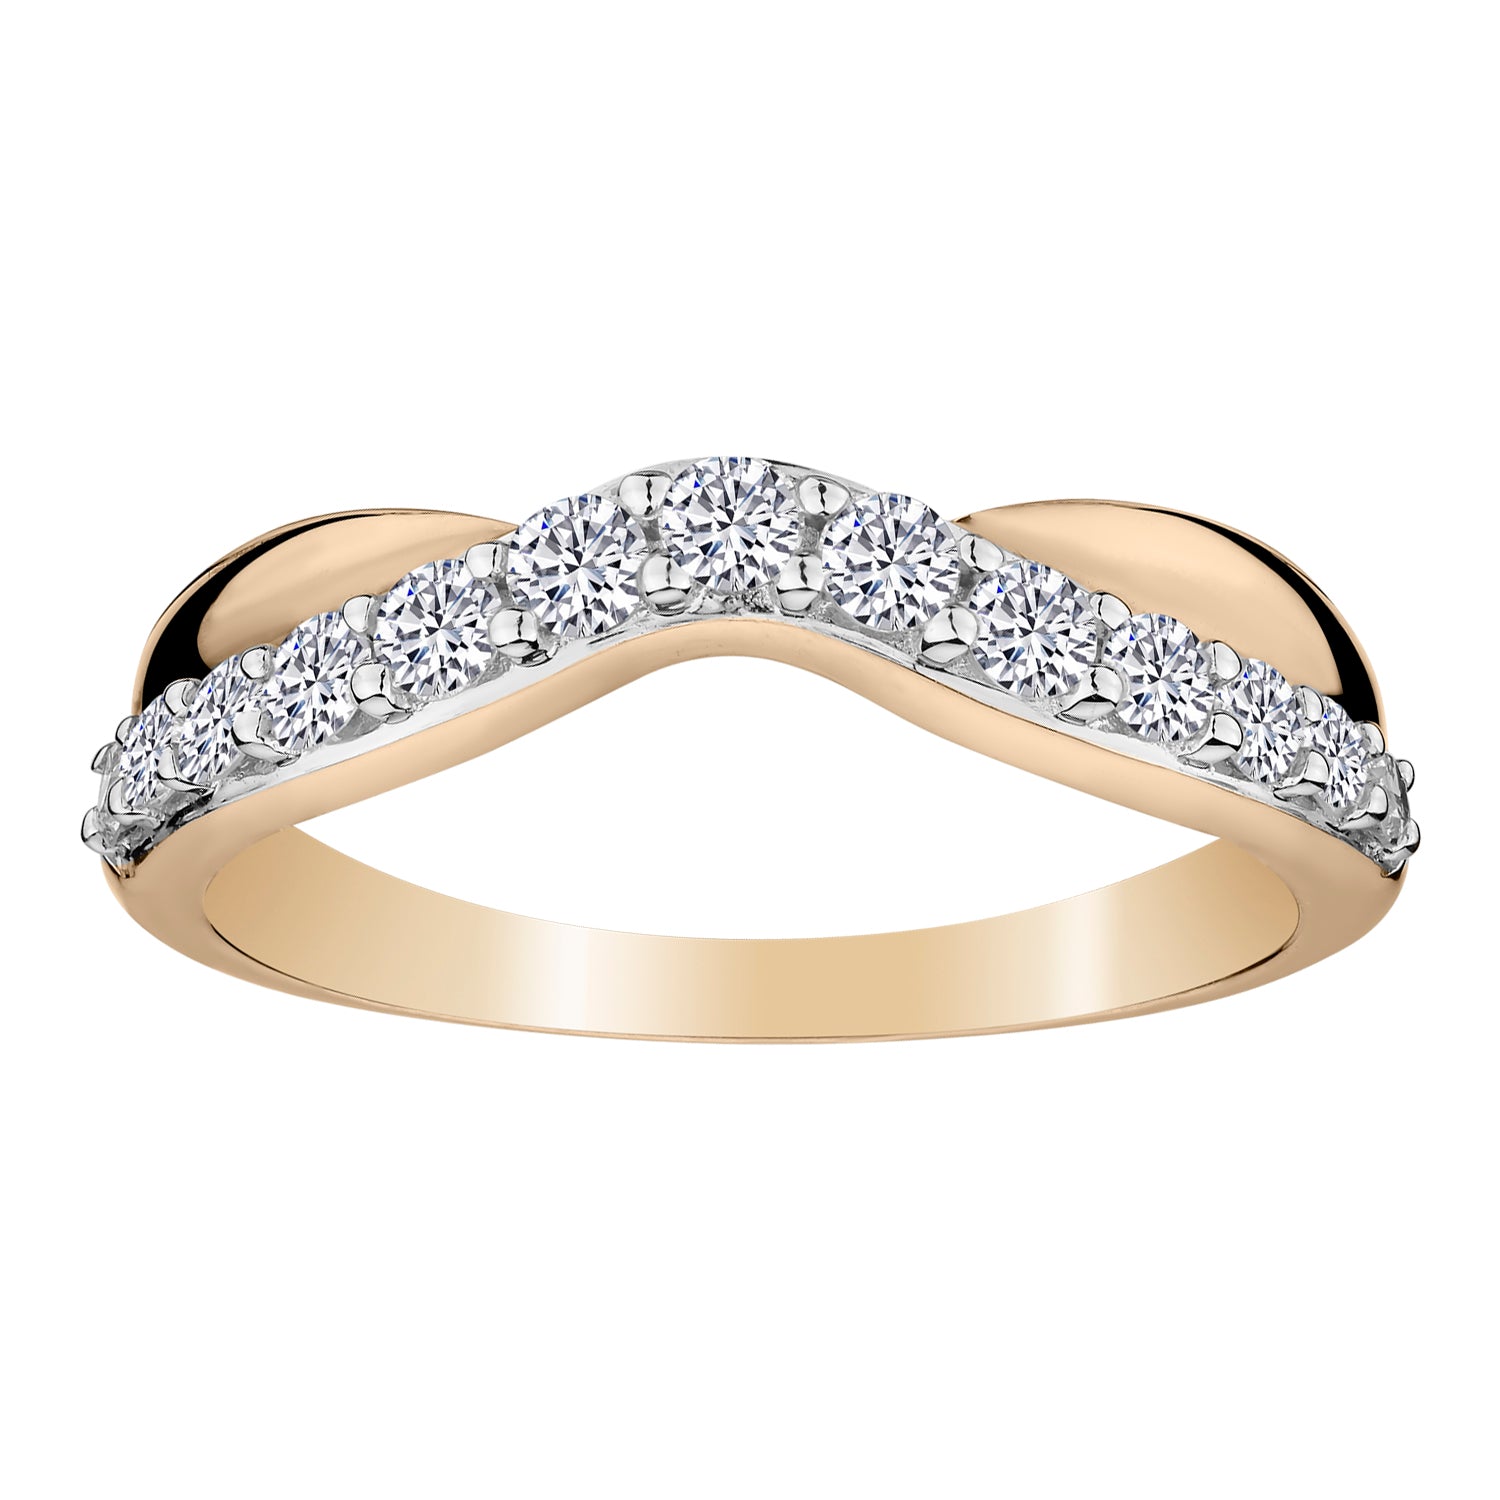 .50 Carat Diamond Ring, 14kt Yellow Gold. Fashion Rings. Griffin Jewellery Designs